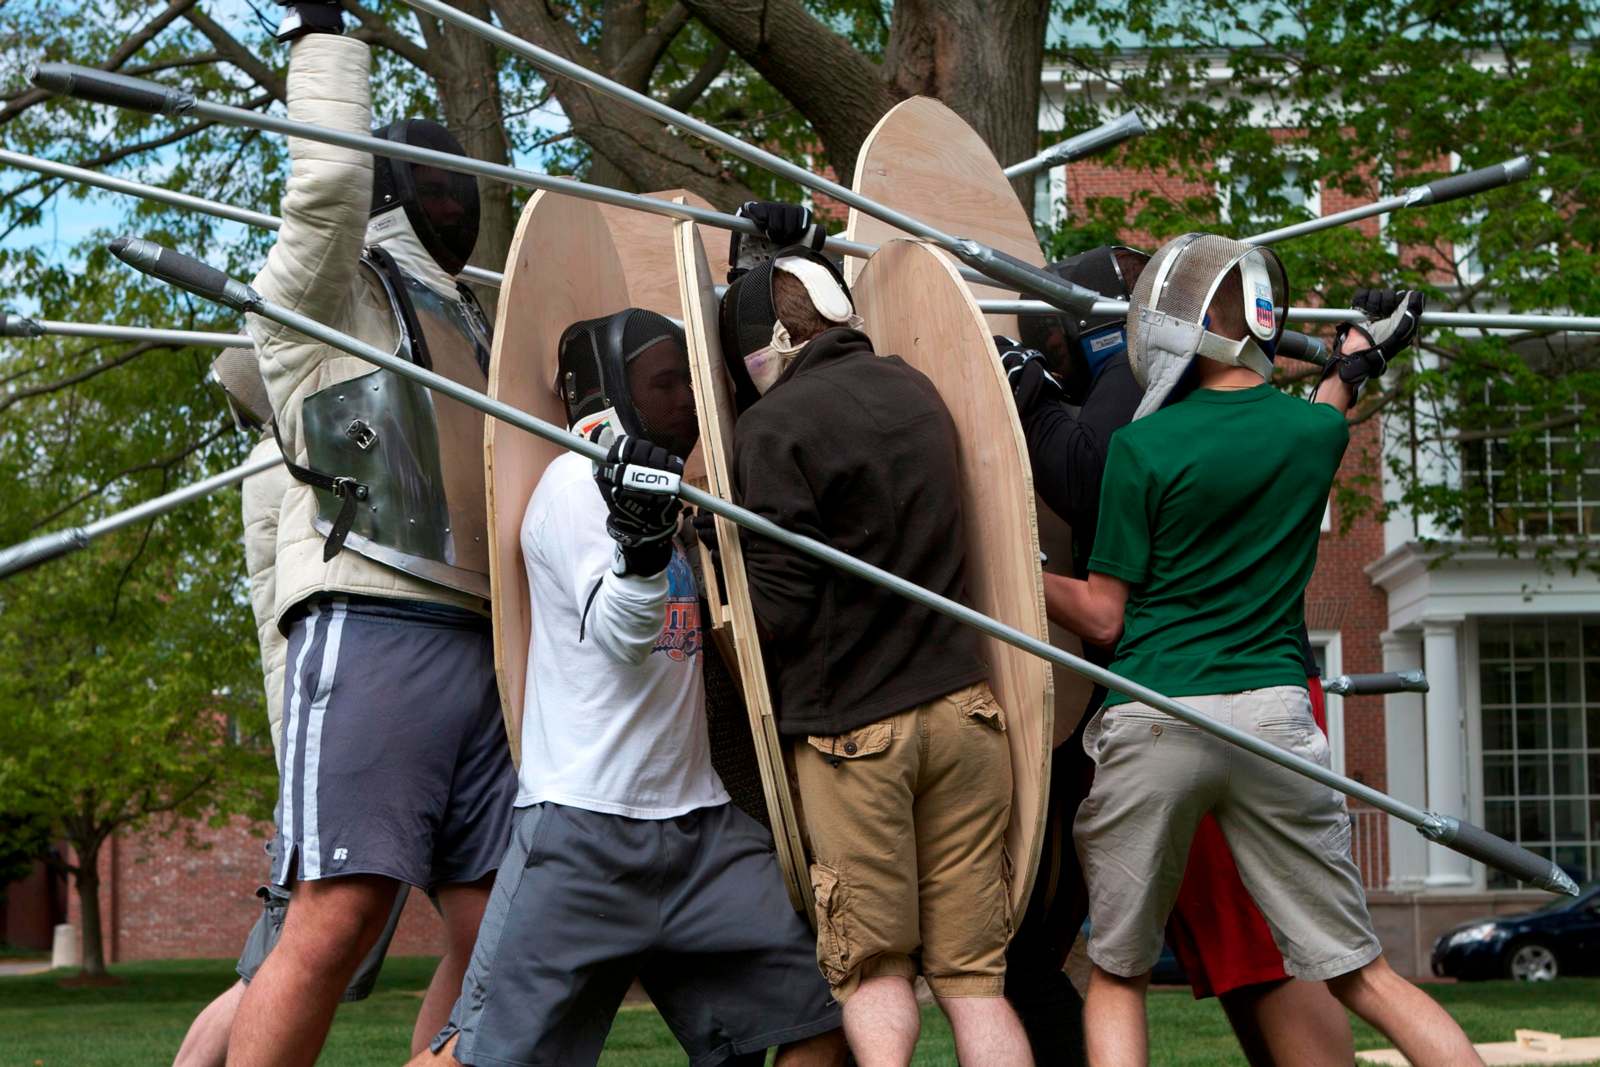 a group of people wearing helmets and shields